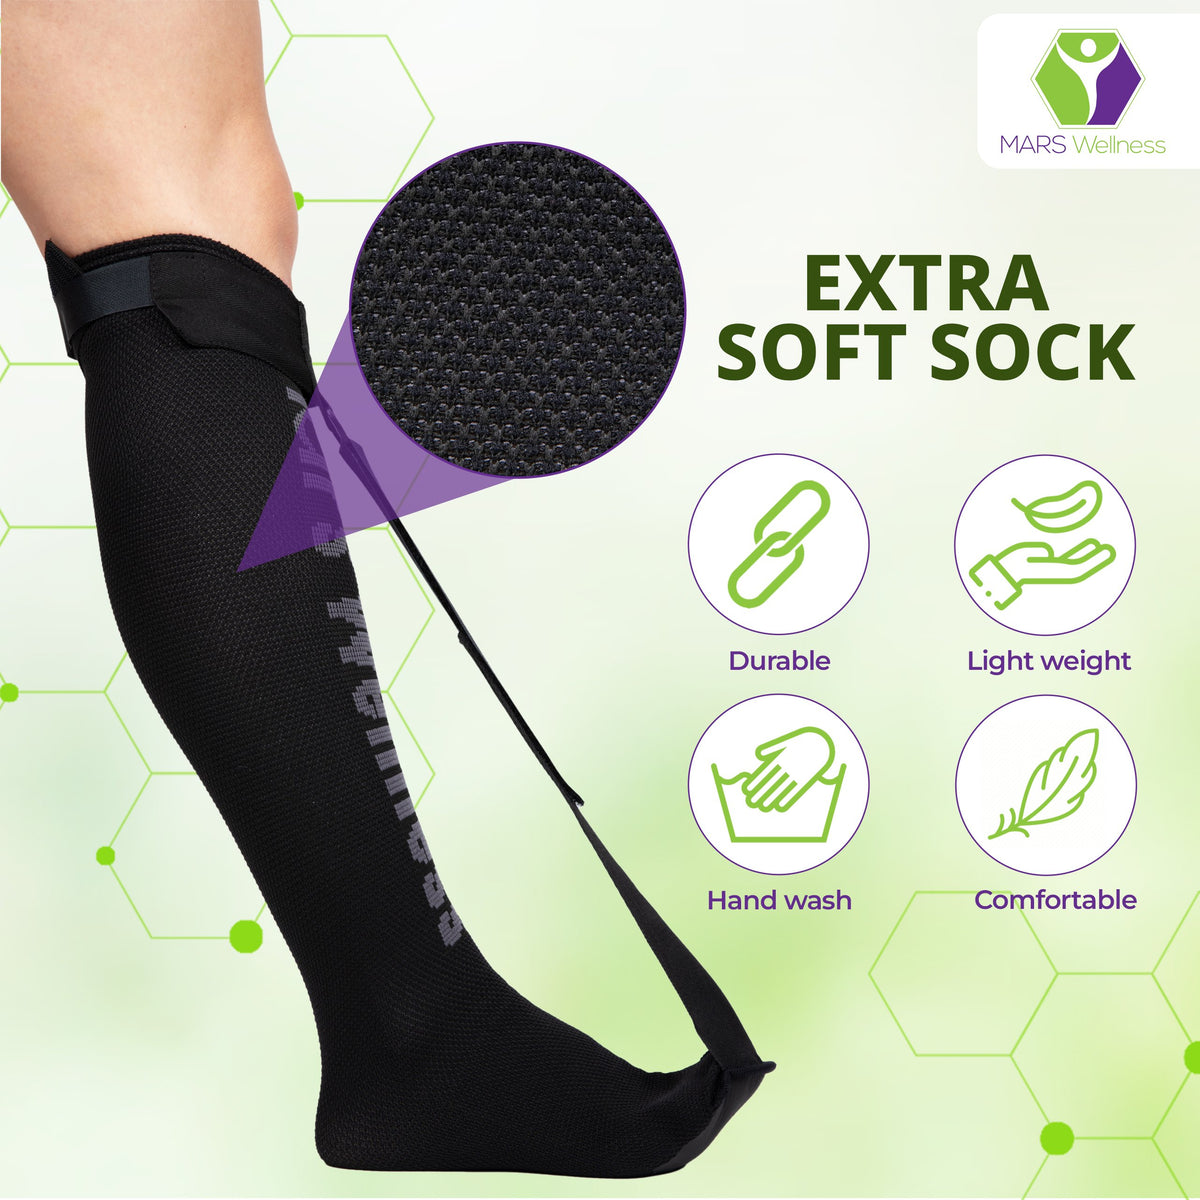 Mars Wellness PFS Plantar Fasciitis Stretch Night Sock with Tread - for Pain Relief from Plantar Fasciitis and Achilles Tendonitis - Black -